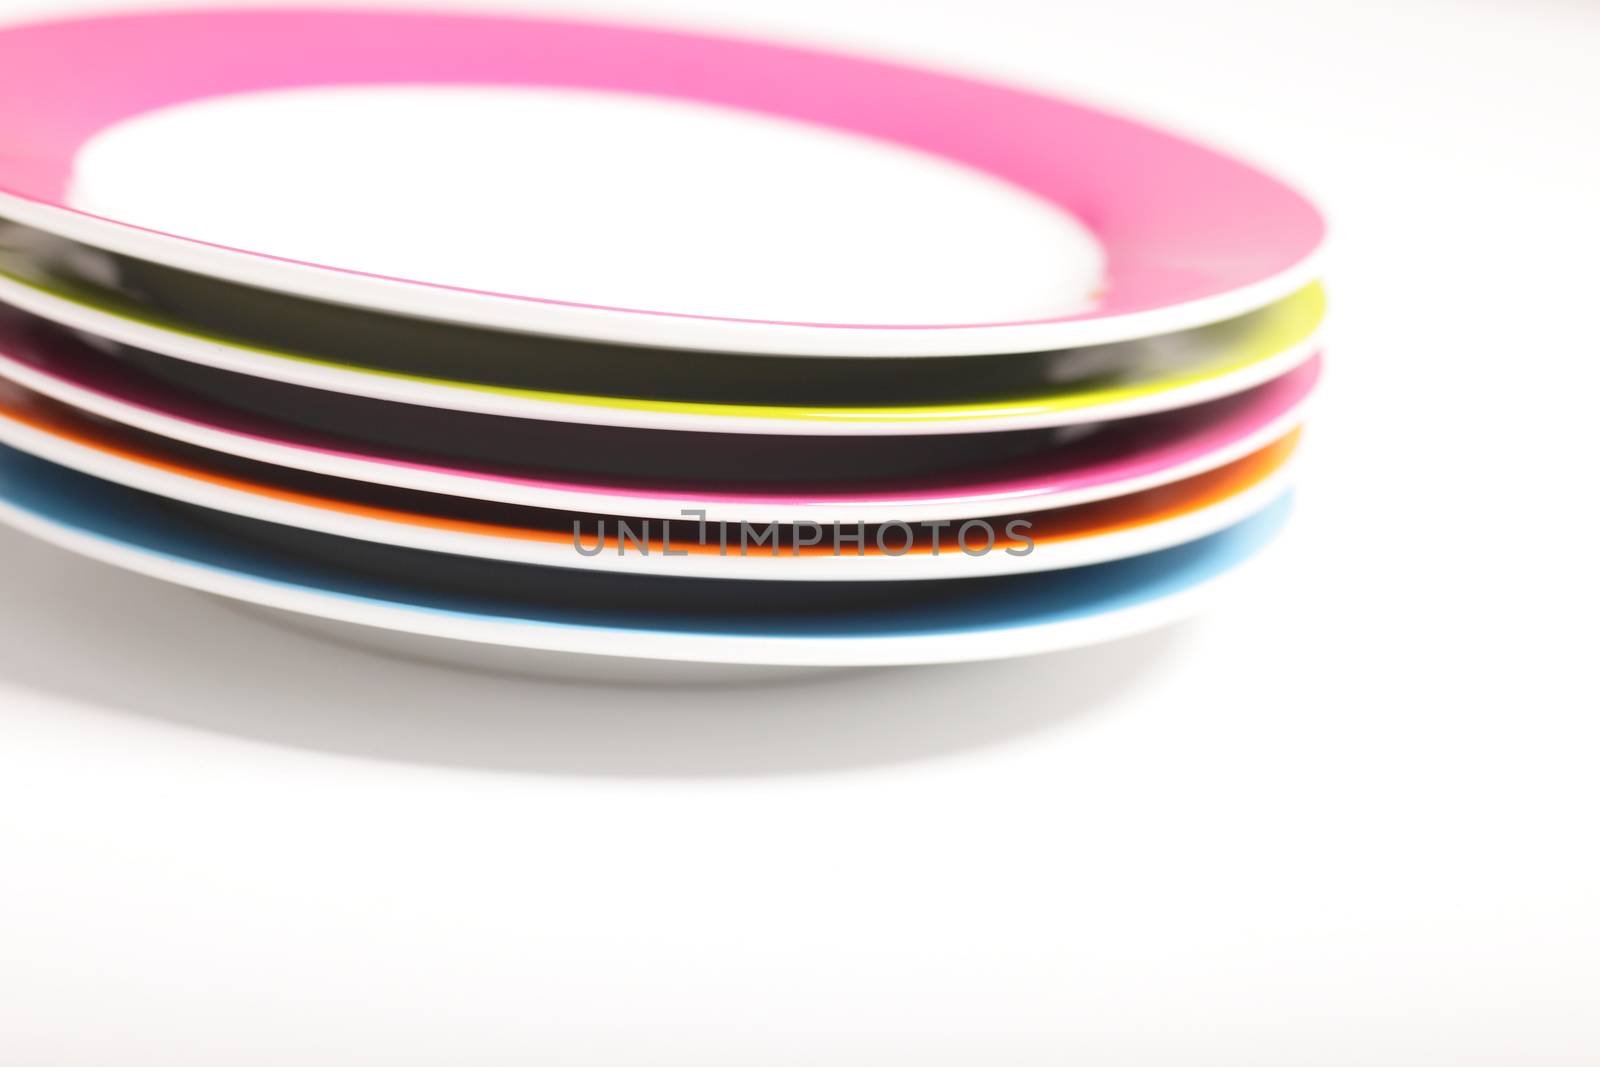 Stack of colourful empty plates with multicoloured borders for catering and serving food on a white background